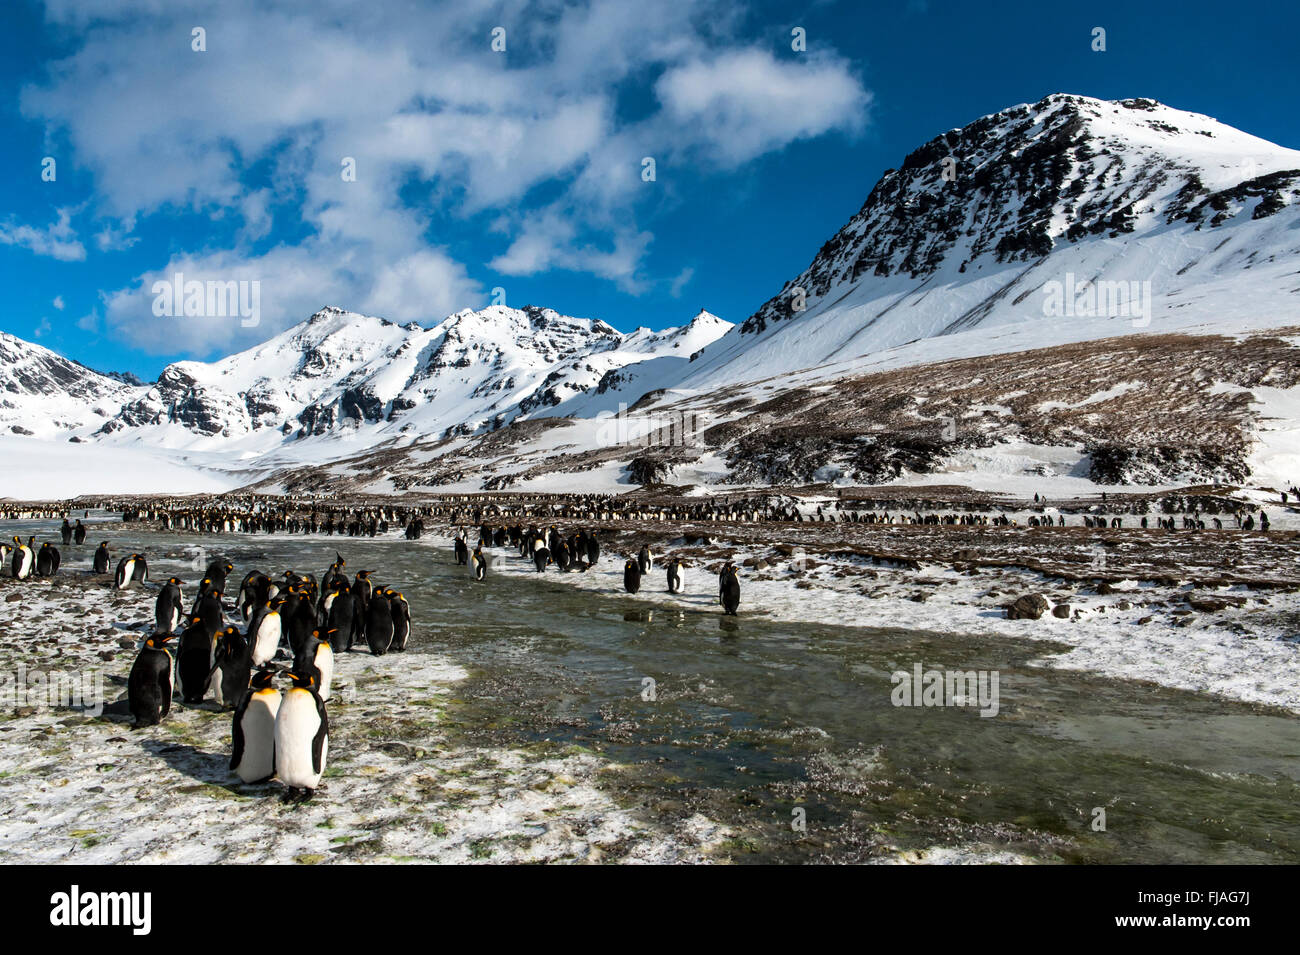 King Penguins (Aptenodytes patagonicus) colony with snow-capped mountains in the background in Saint Andrews Bay, South Georgia Stock Photo